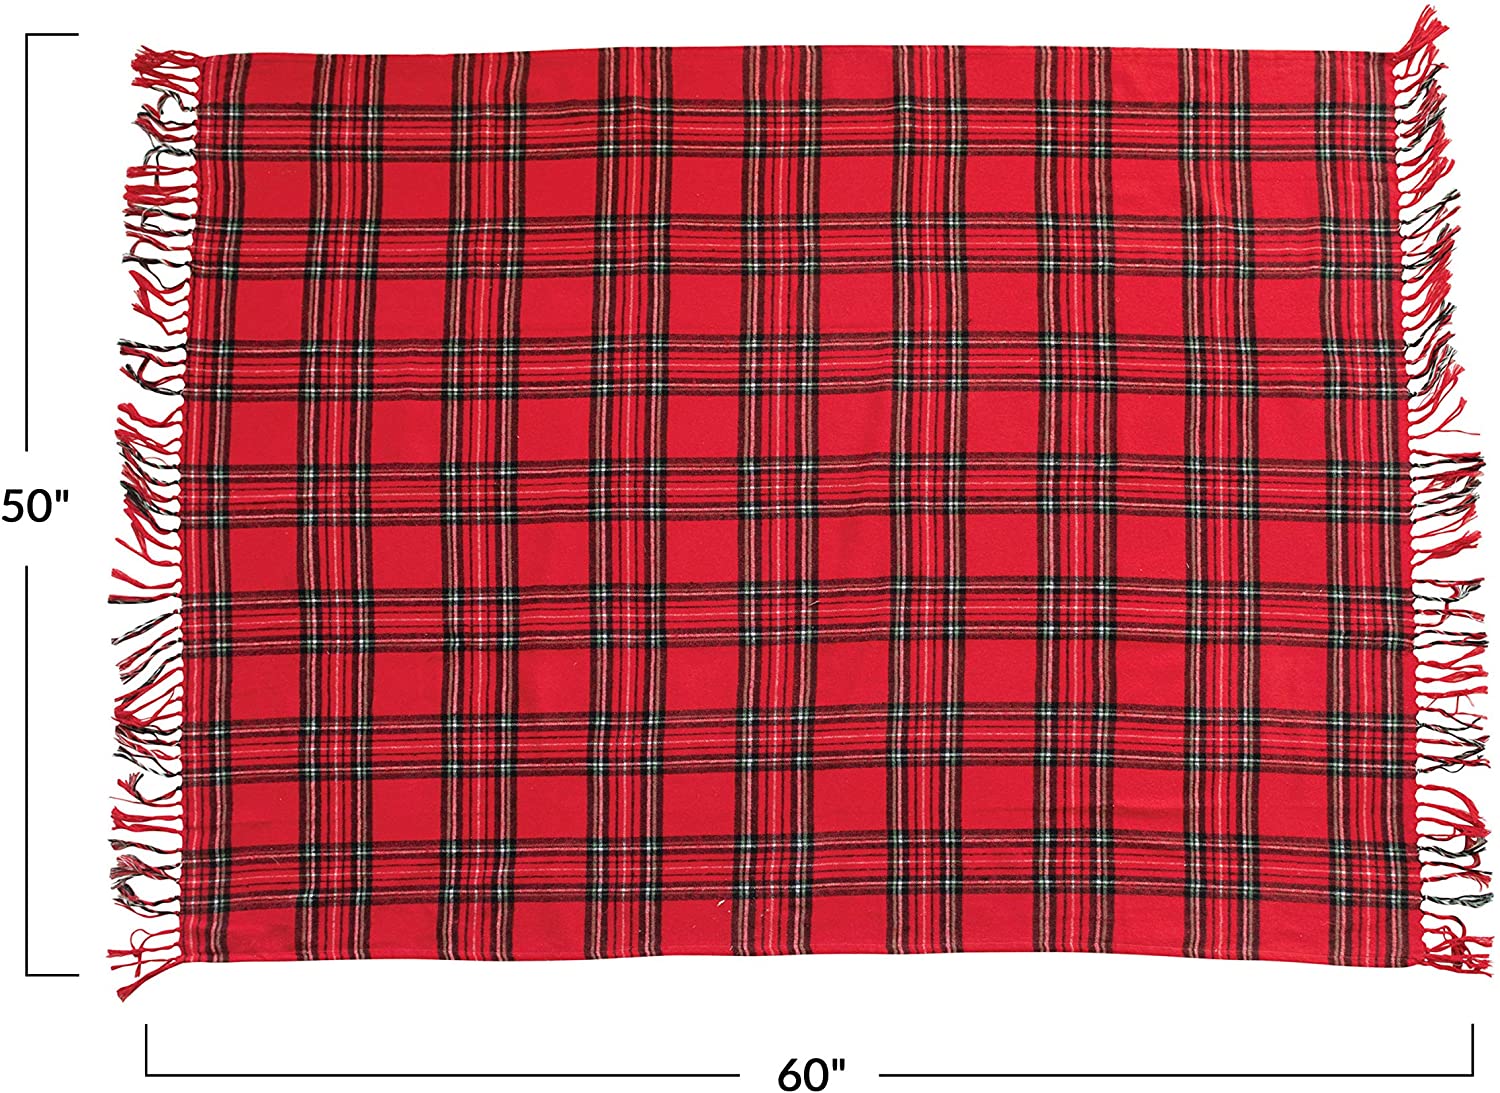 Brushed Cotton Plaid Throw with Fringe - 60-in x 50-in - Mellow Monkey